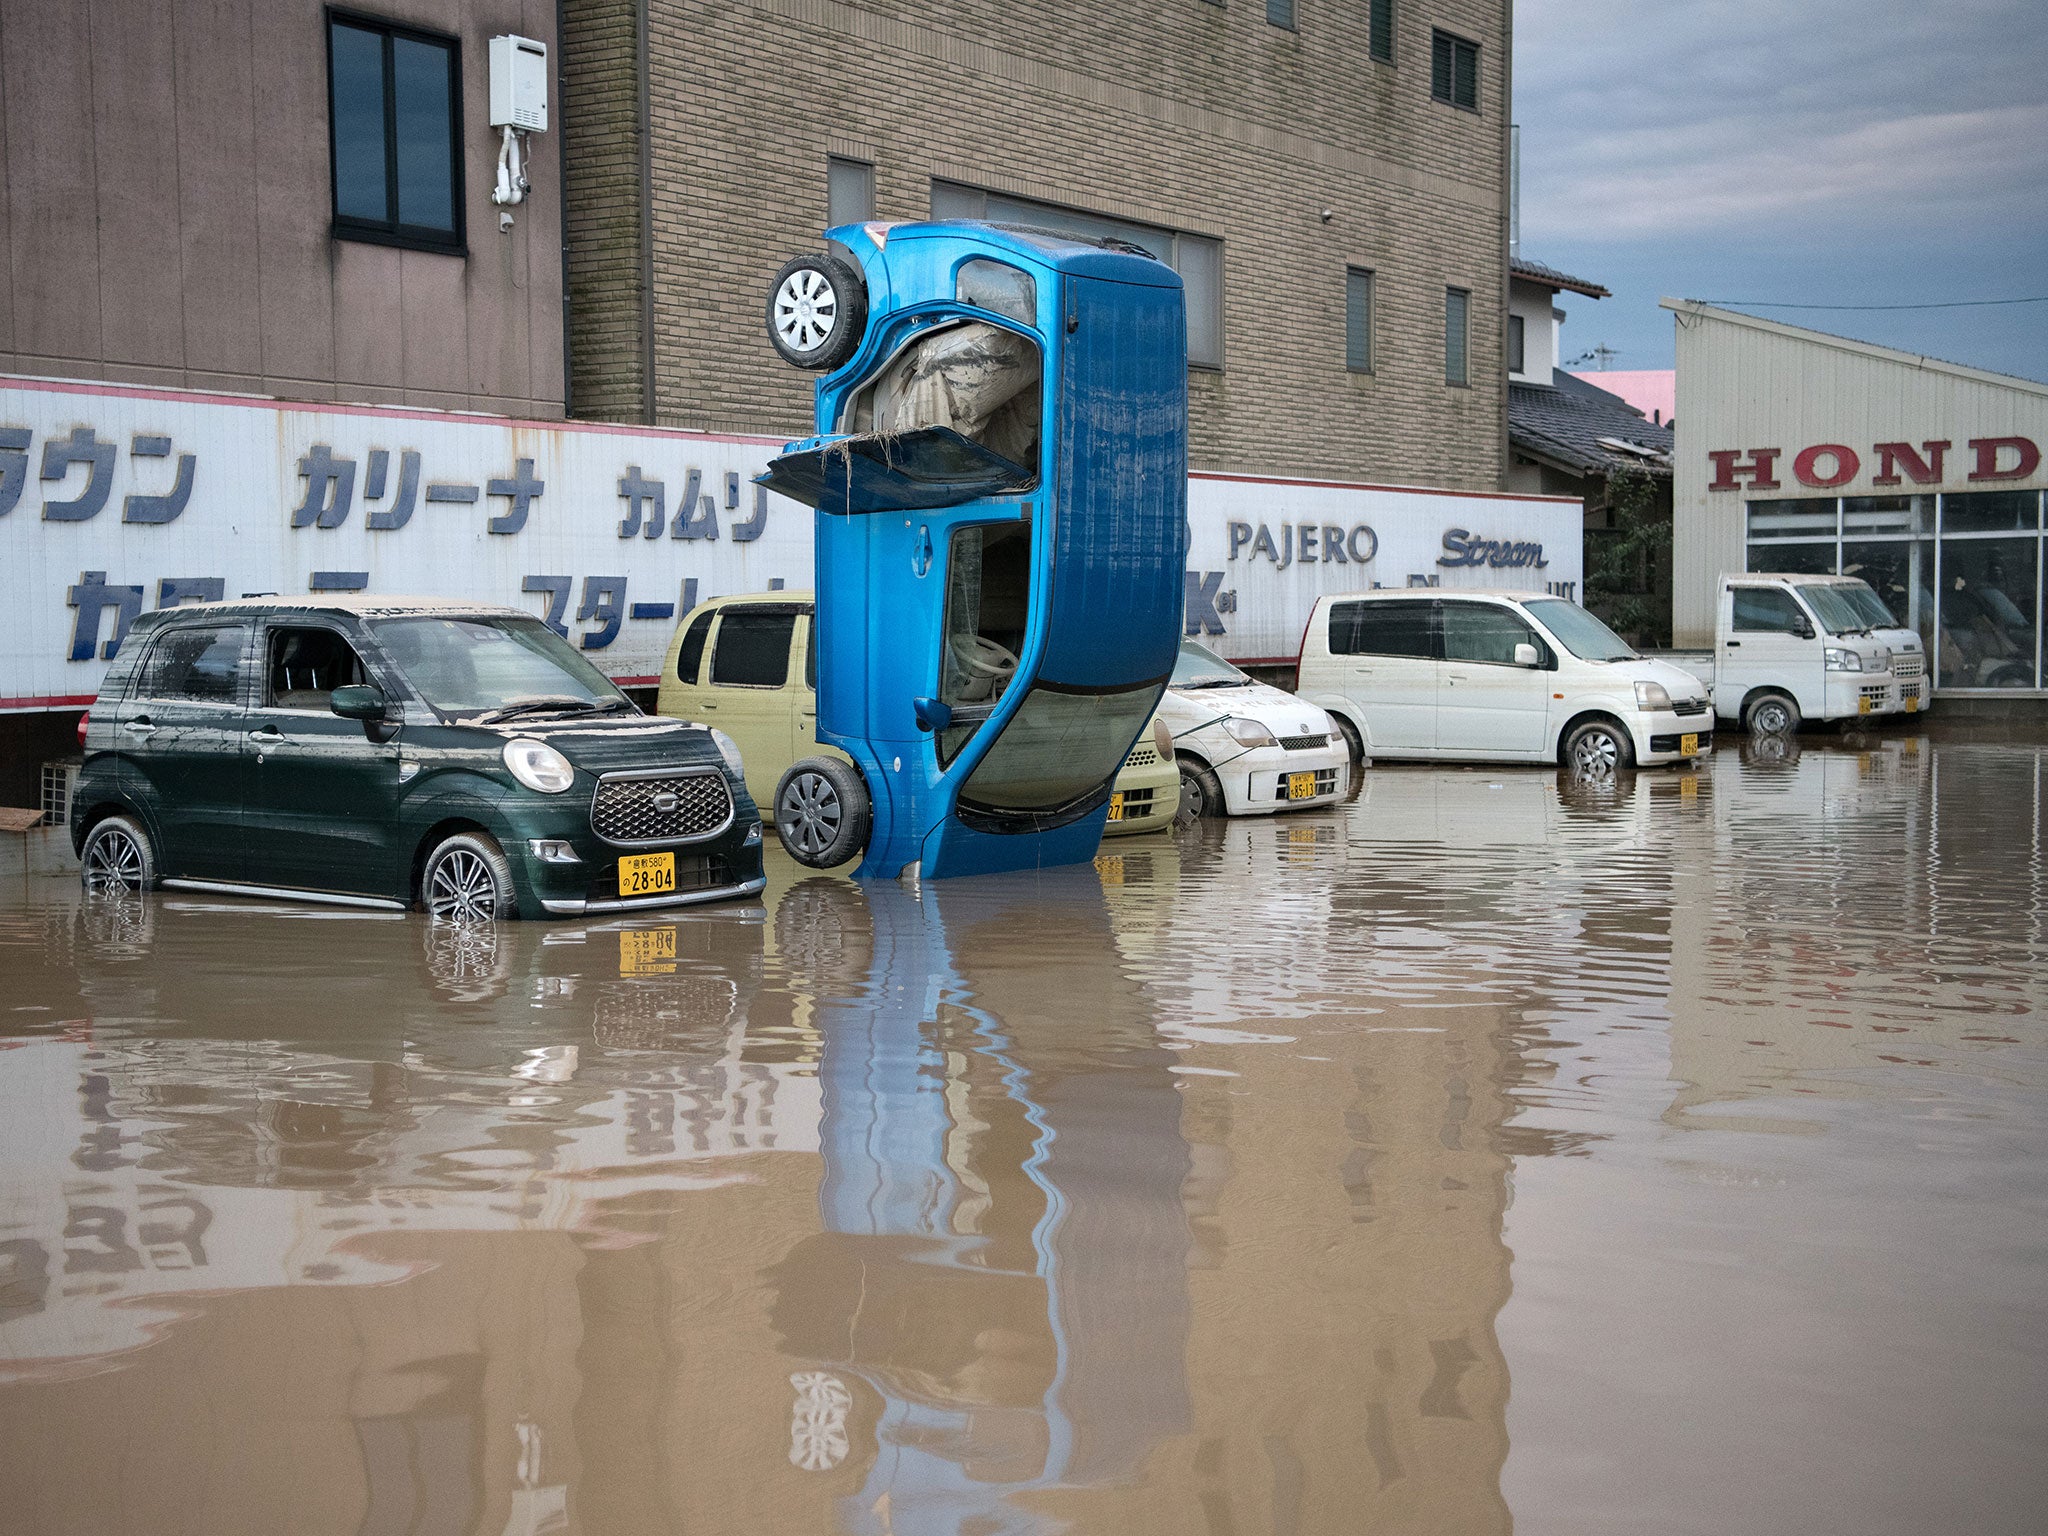 A car stands on its front after heavy flooding (Getty)